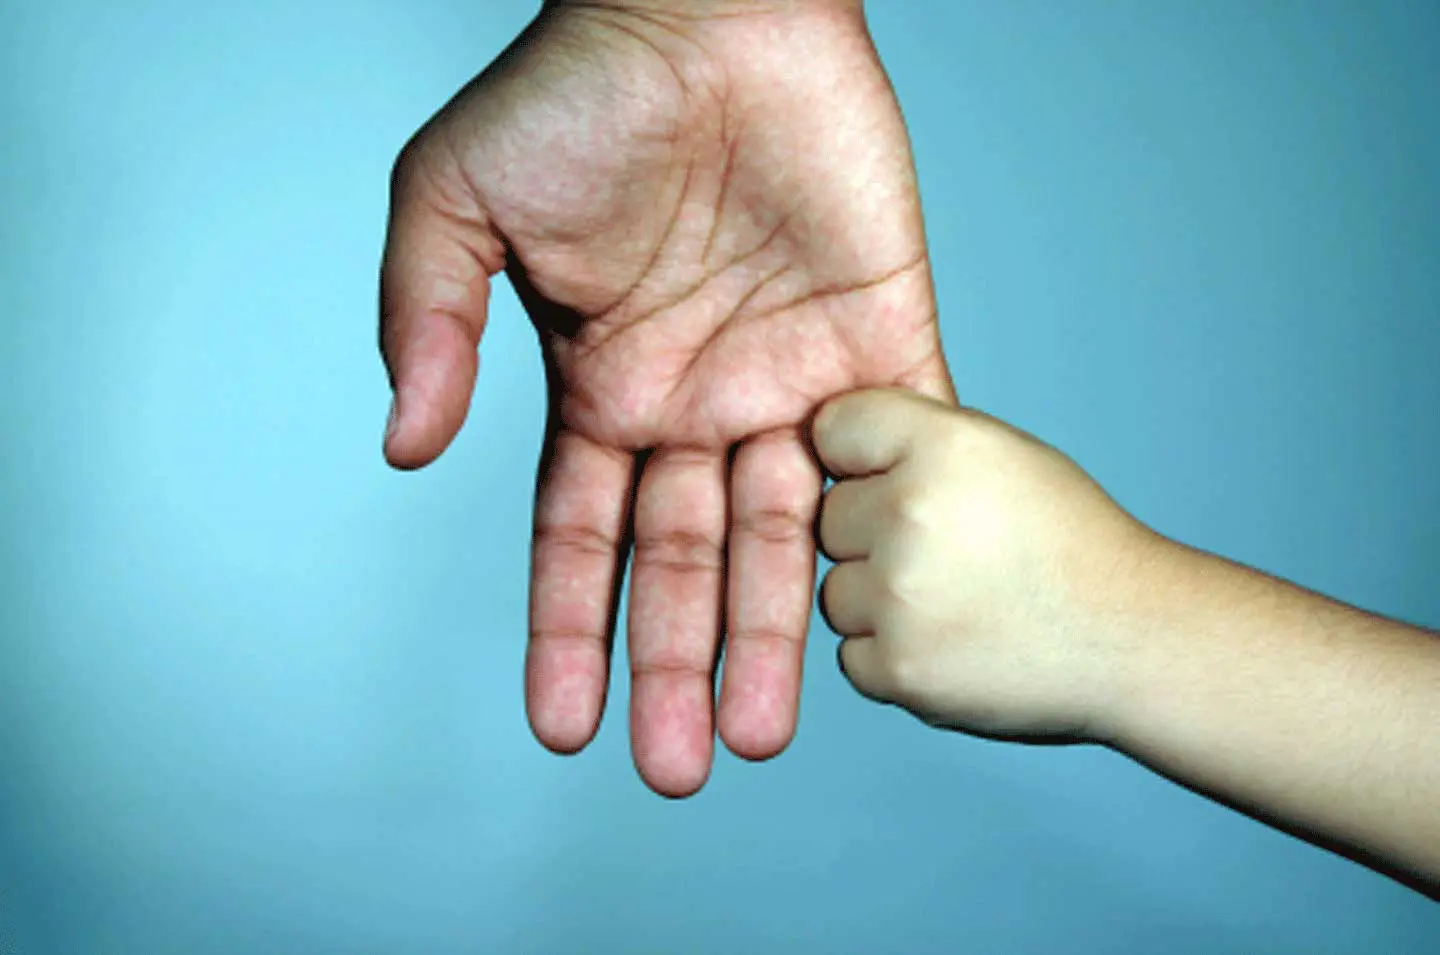 A child 's hand is touching the palm of an adult.